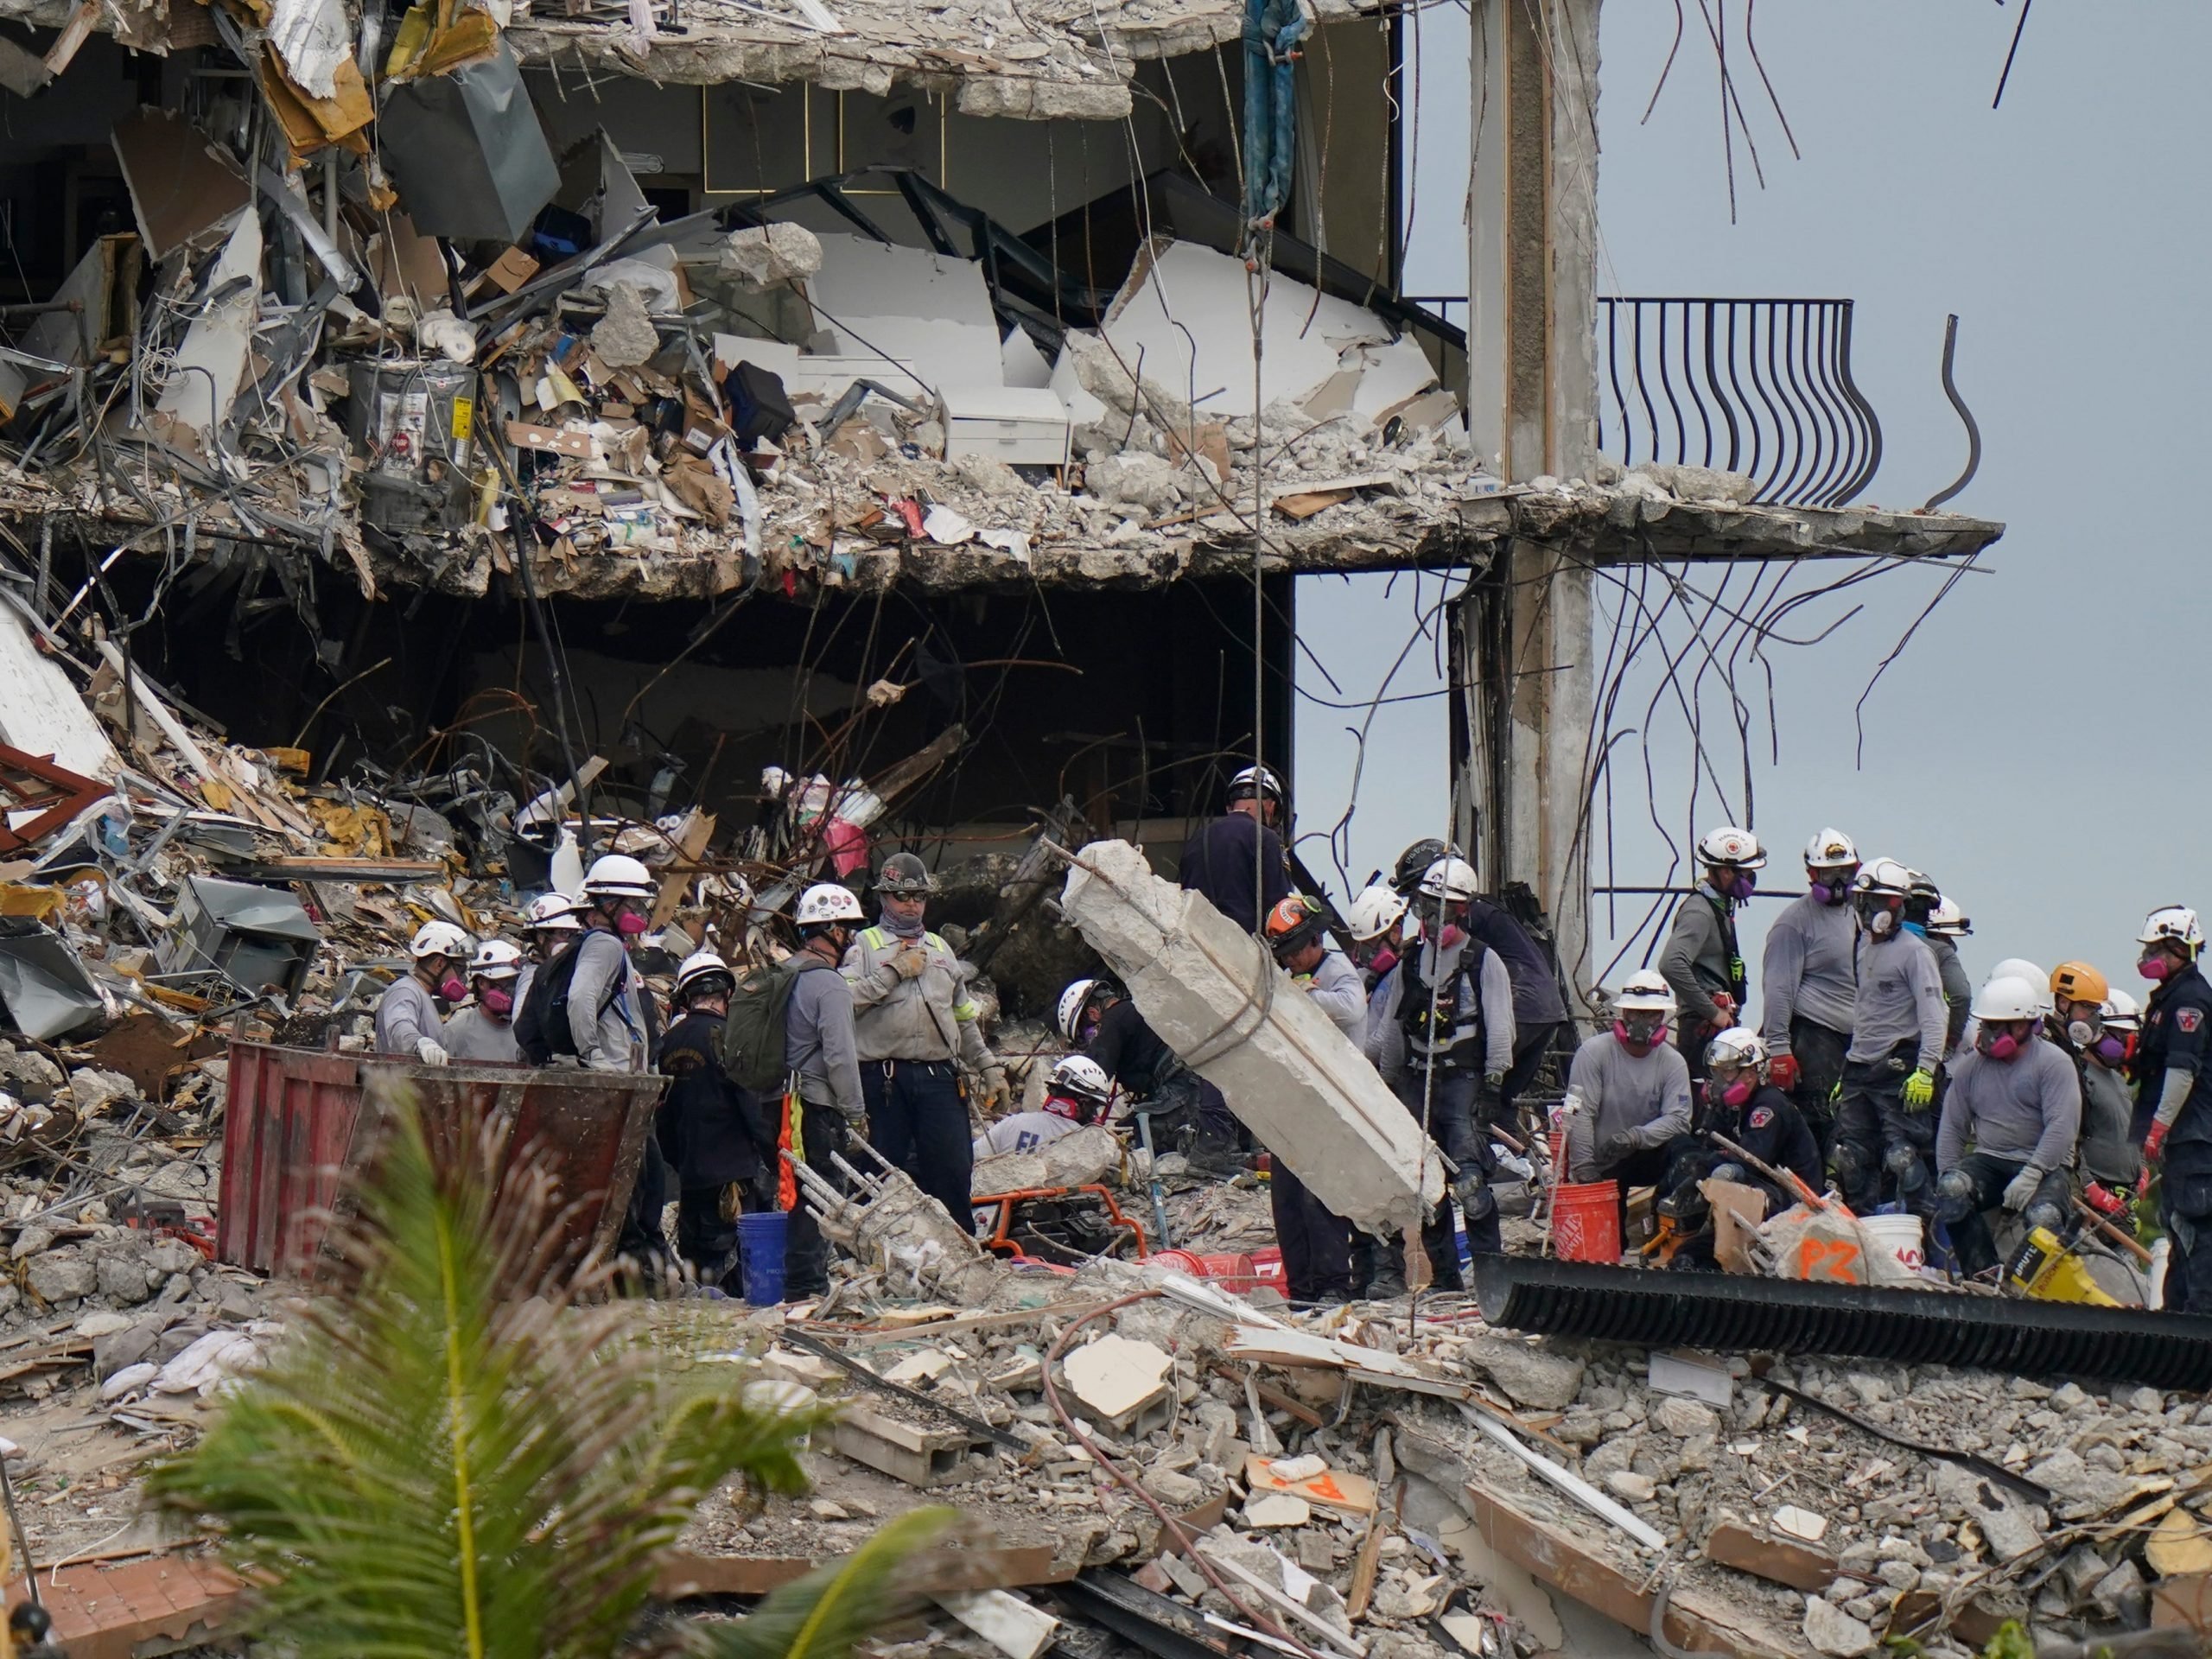 Search and rescue personnel work atop the rubble at the collapsed Champlain Towers South condo building.